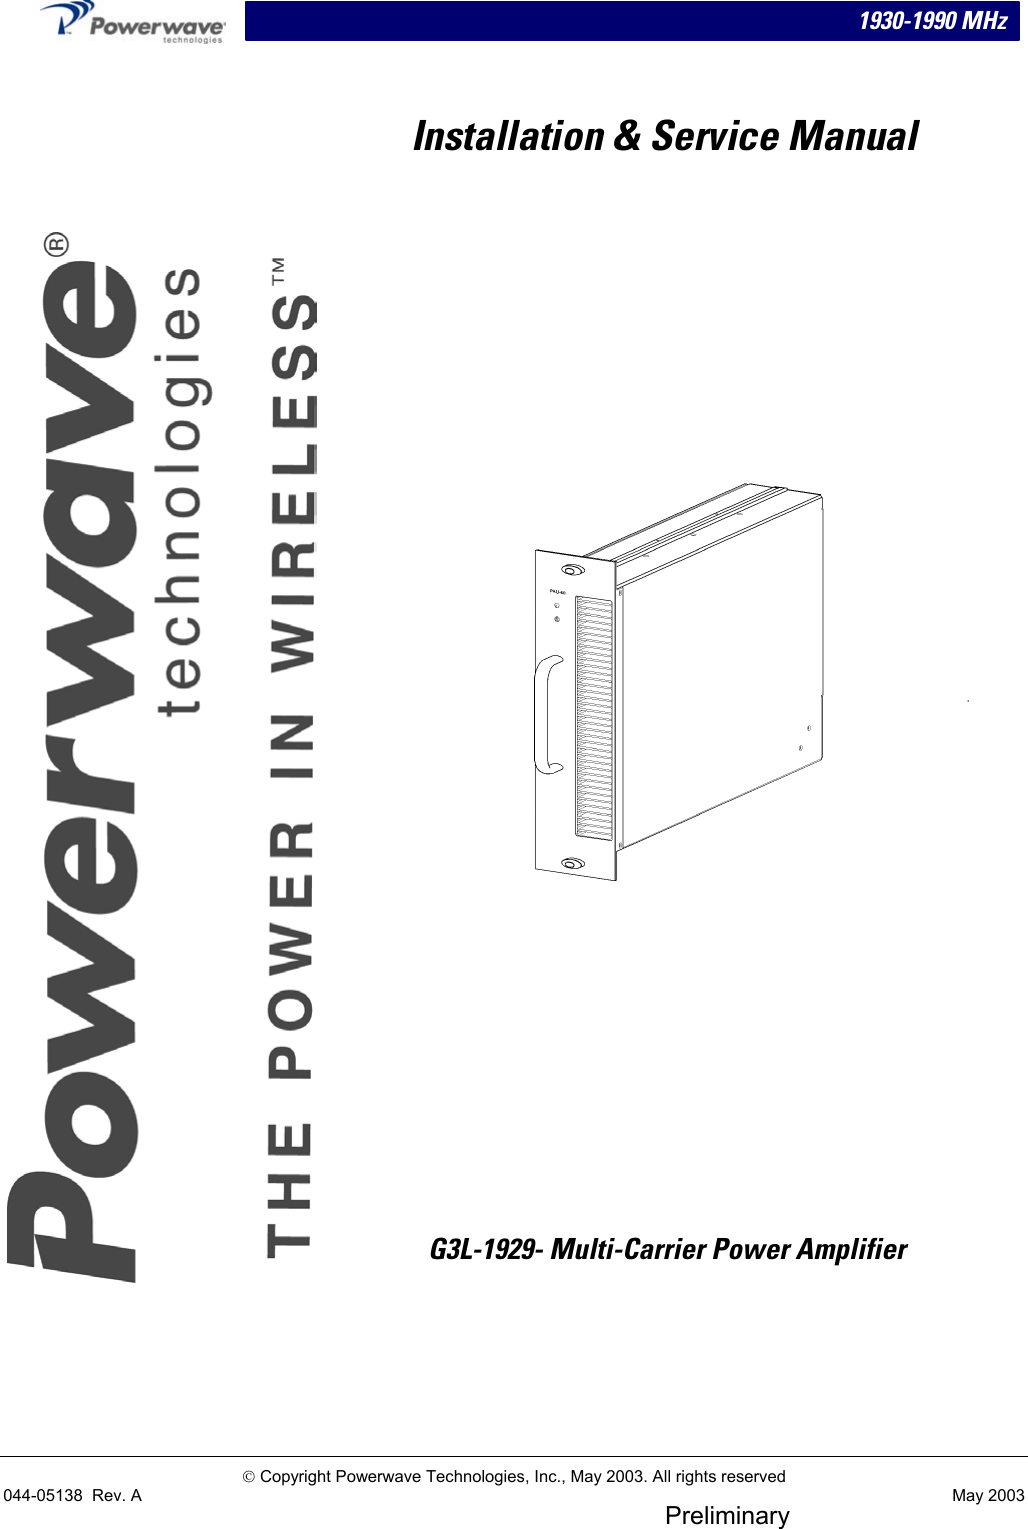 1930-1990 MHz  Installation &amp; Service Manual                             G3L-1929- Multi-Carrier Power Amplifier      Copyright Powerwave Technologies, Inc., May 2003. All rights reserved 044-05138  Rev. A  May 2003 Preliminary 